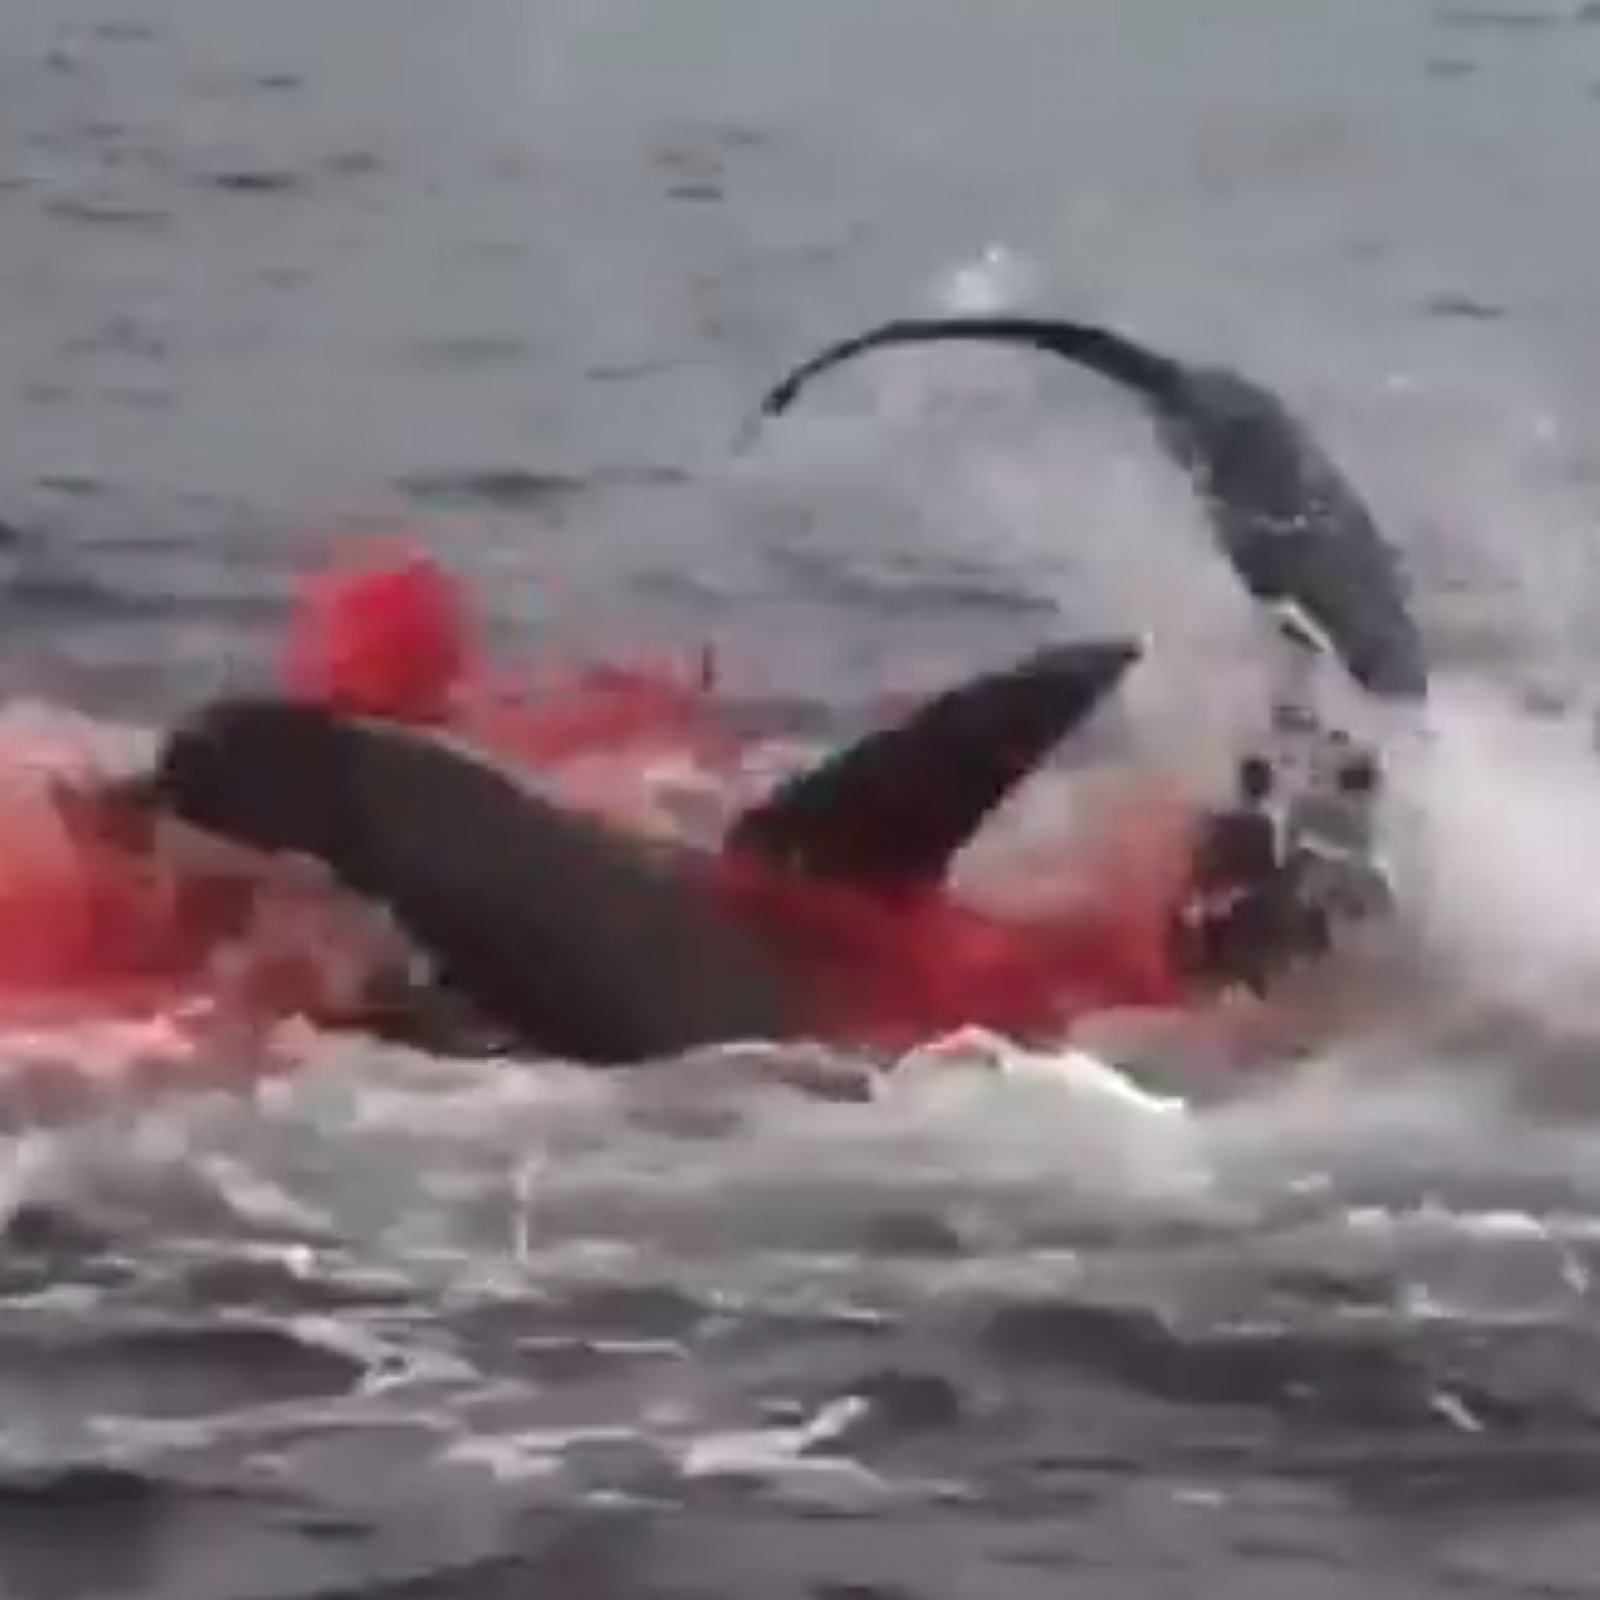 Ocean Turns Red With Blood As Shark Almost Beaches Itself Killing Sea Lion  in Viral Video